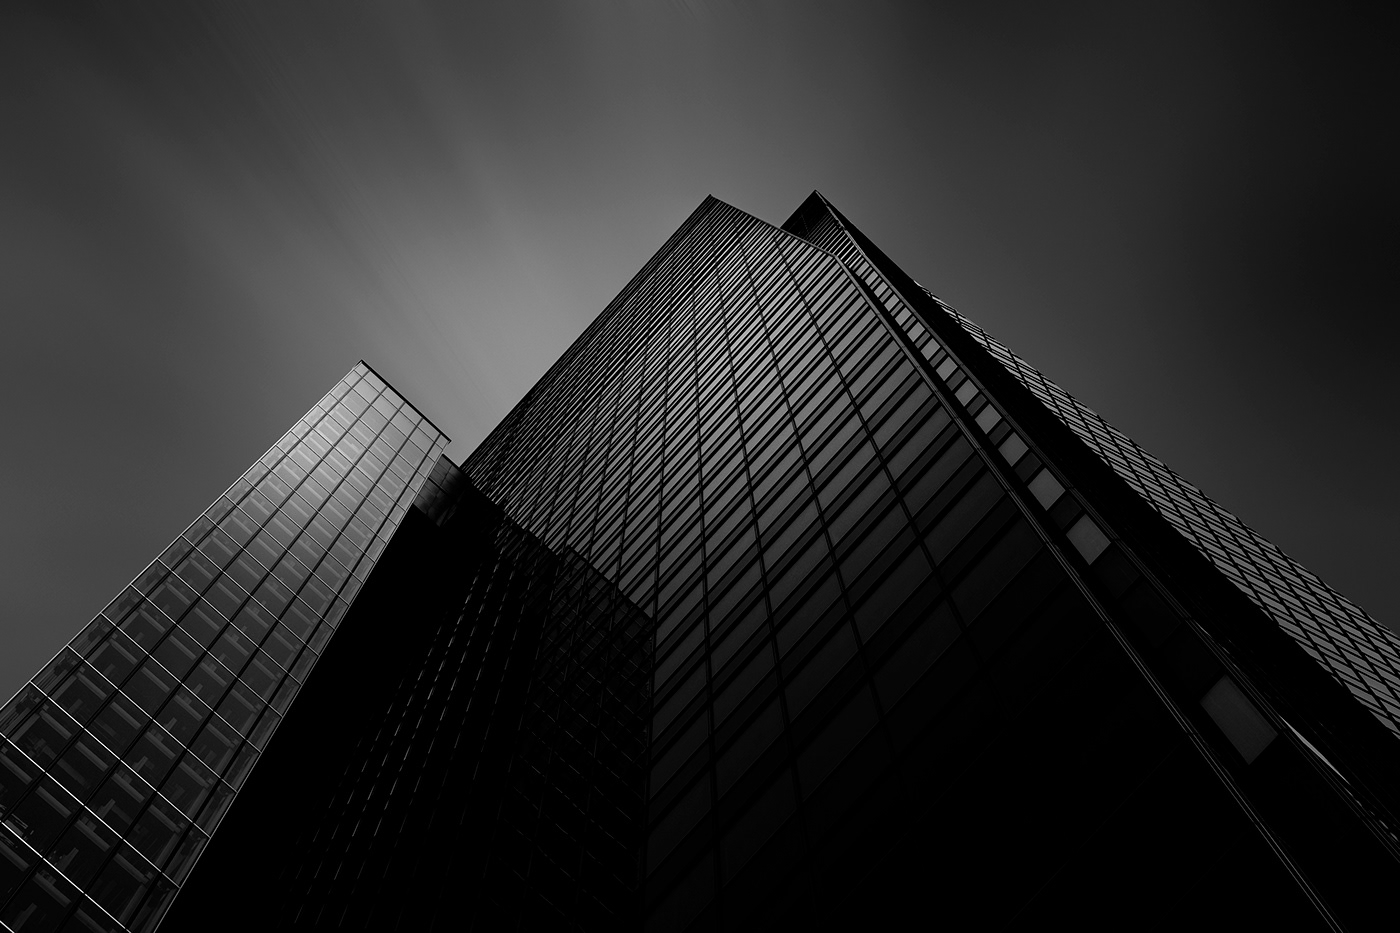 architecture black and white fine art Photography  street photography tokyo Urban